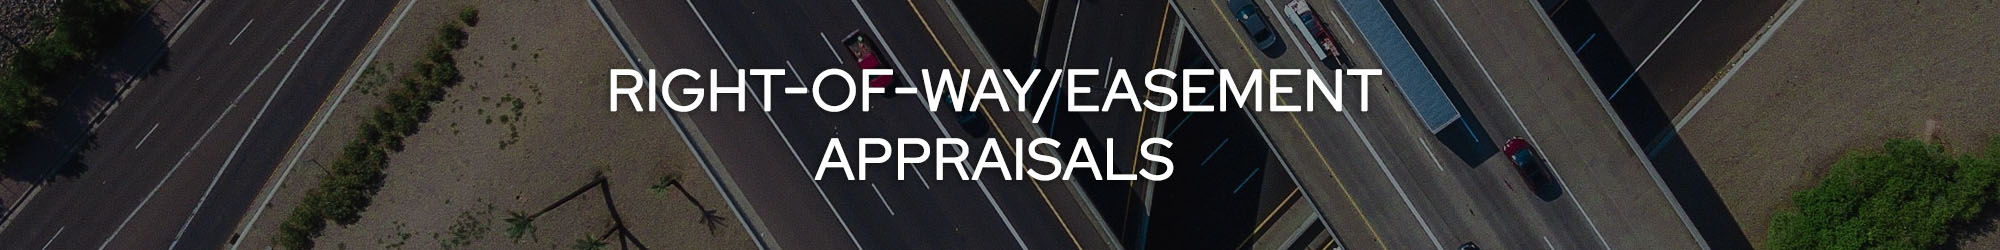 Right of Way/Easement Appraisals from DJ Howard in Highland IL